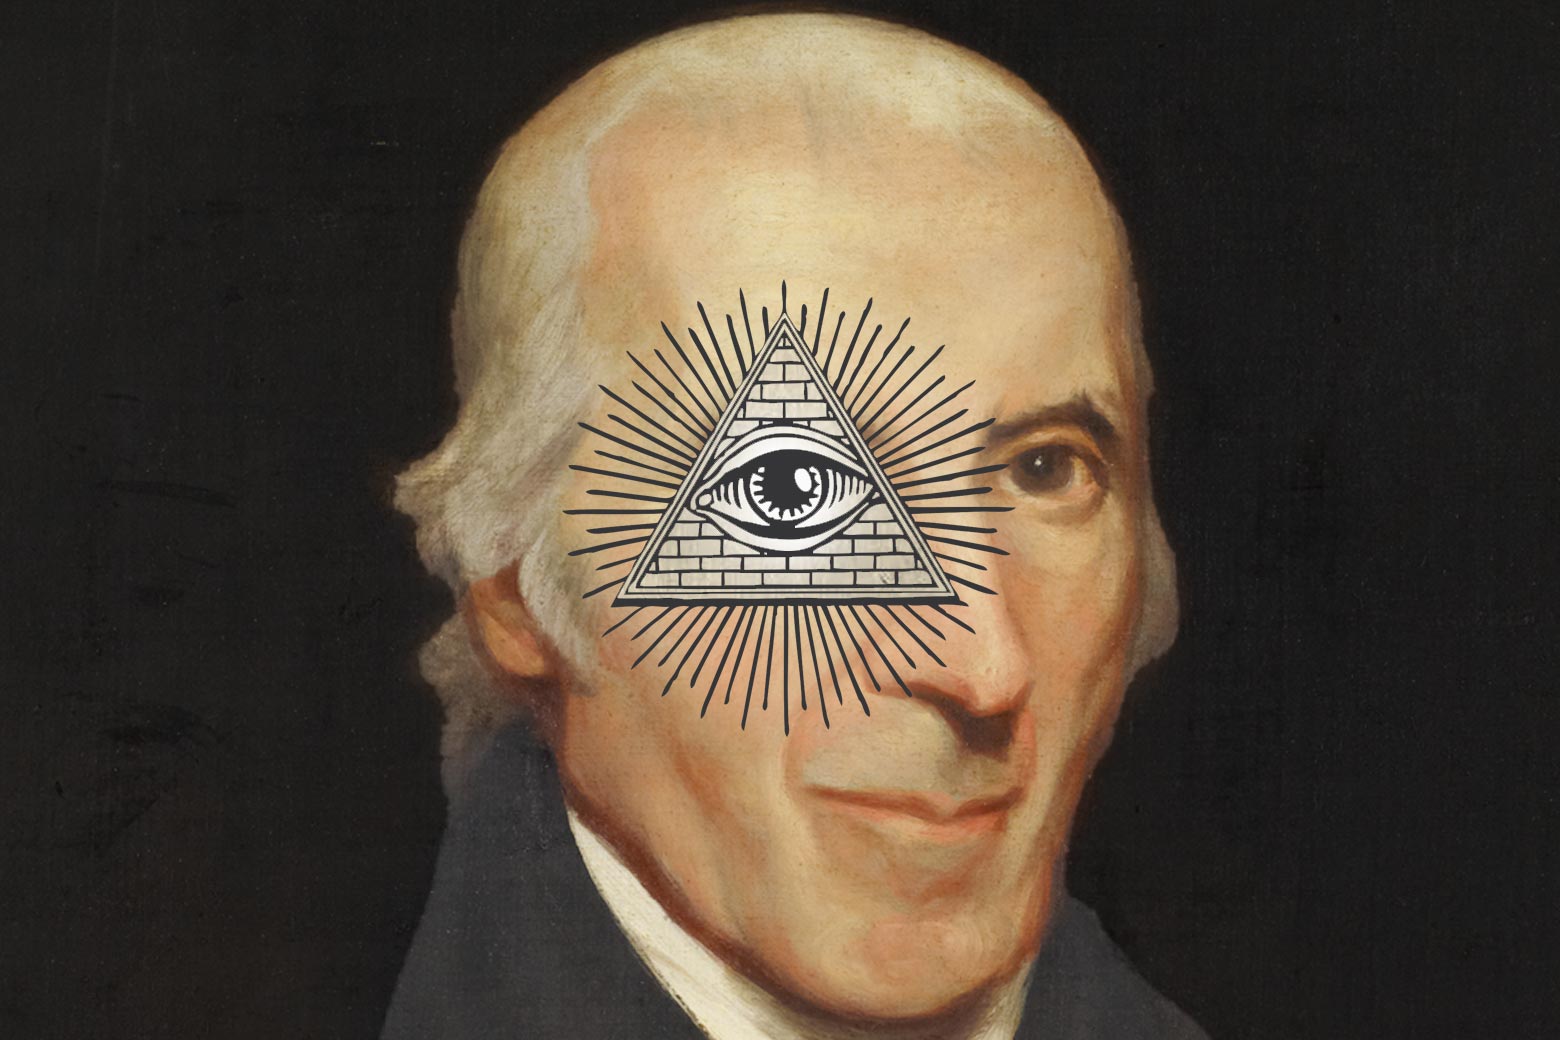 A painting of Jedidiah Morse with an Illuminati symbol in his right eye